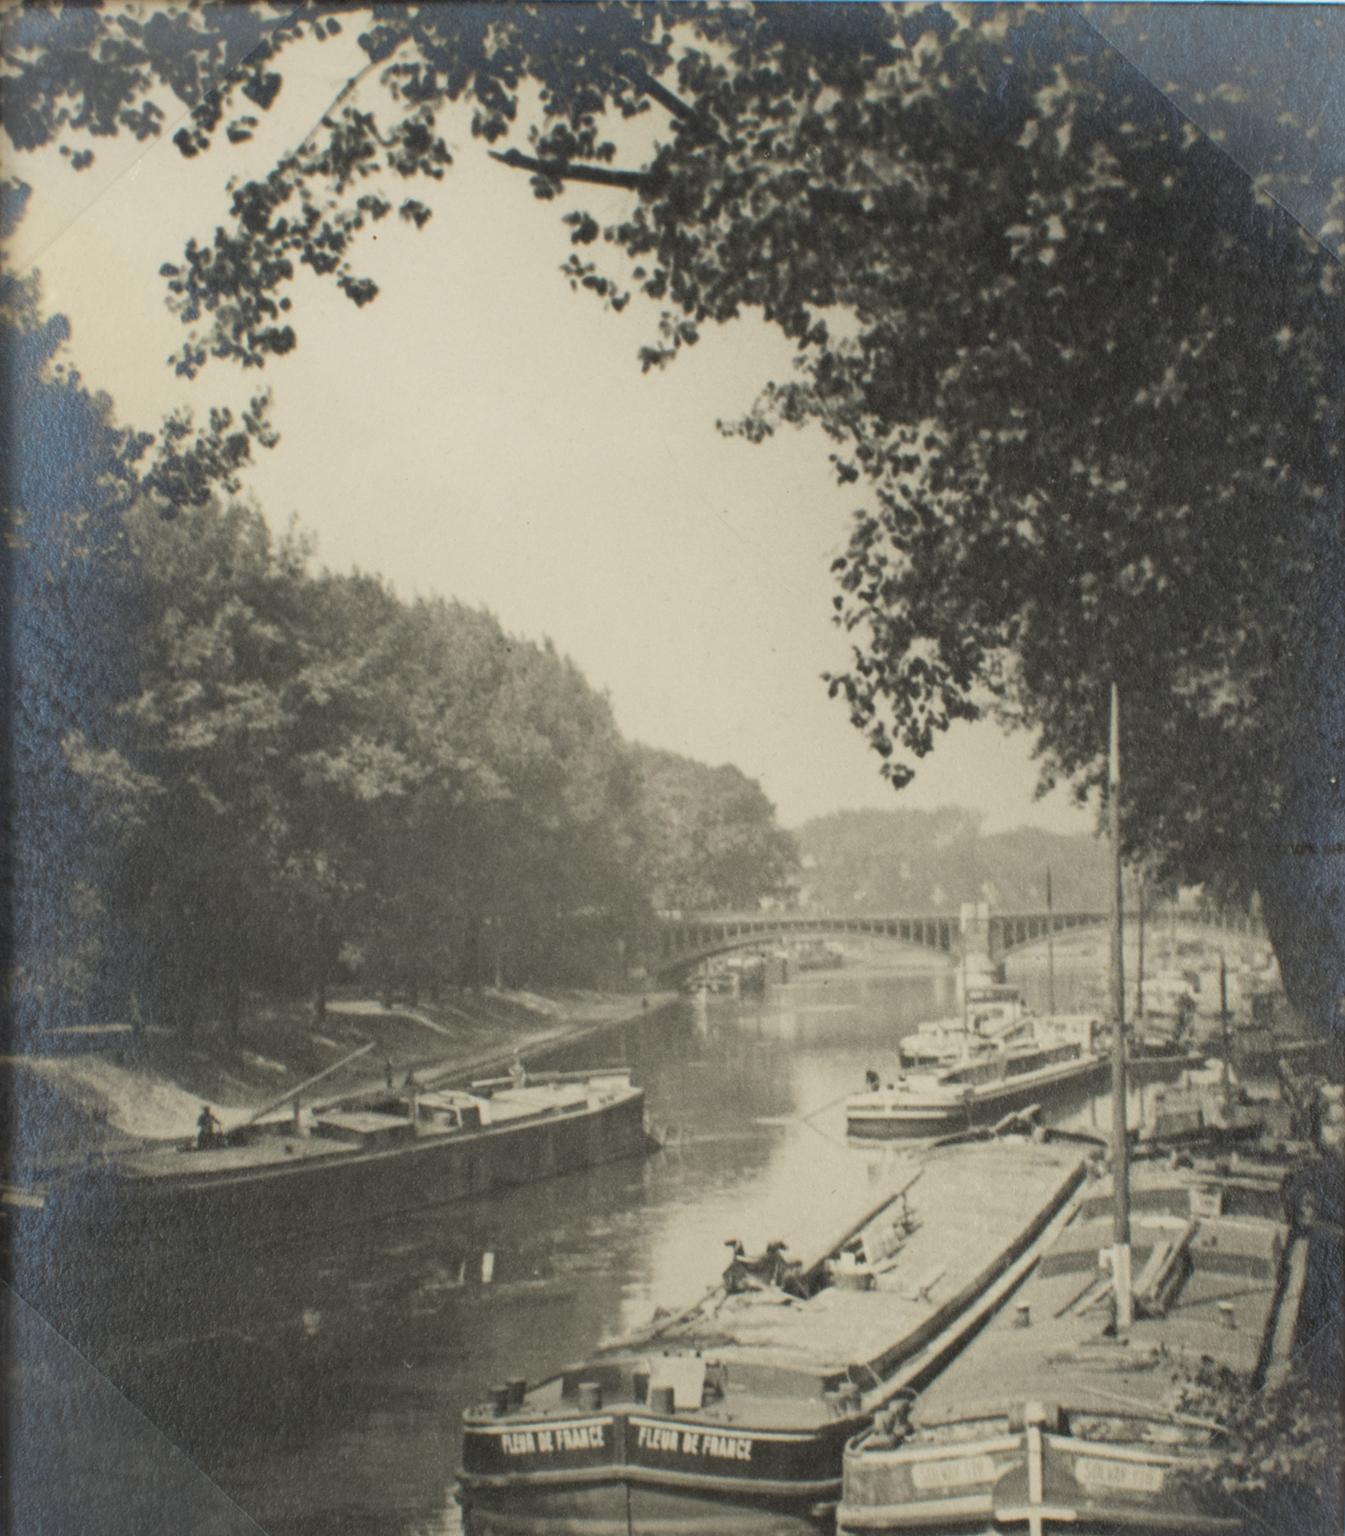 Unknown Landscape Photograph - The Seine and Barges near Paris in 1926, Silver Gelatin B and W Photography